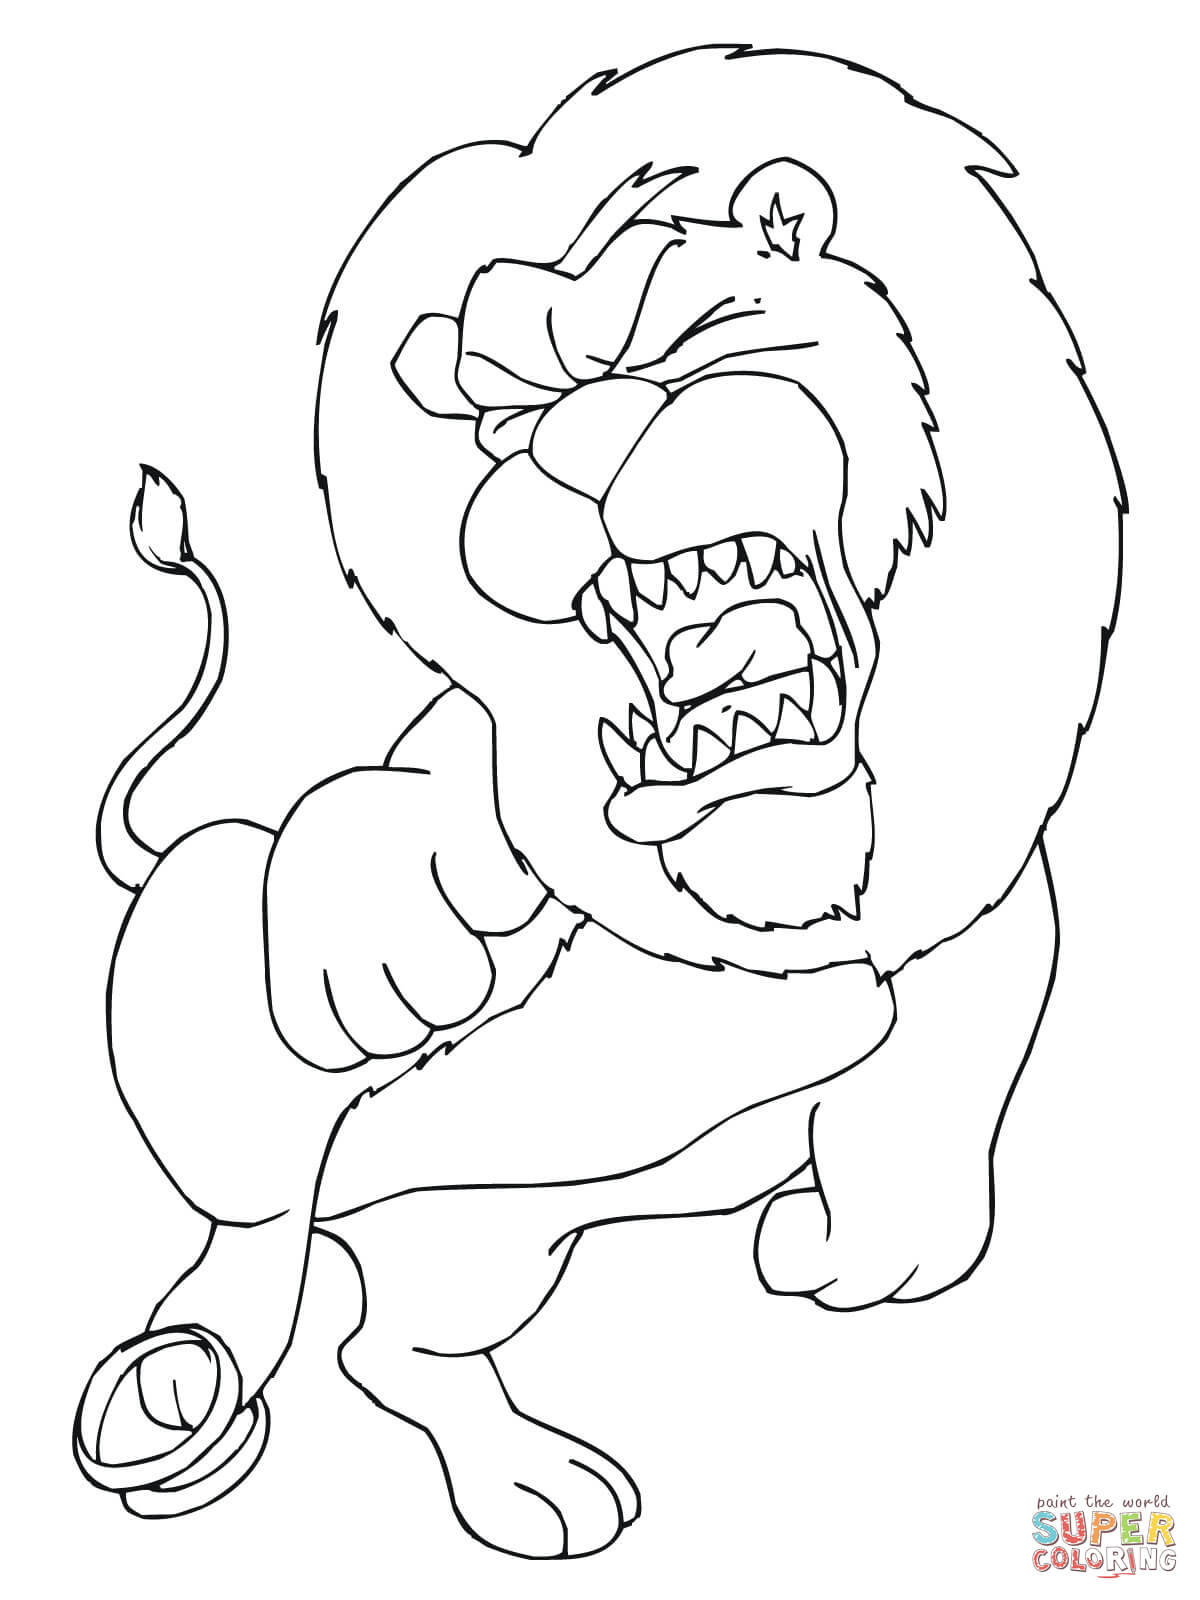 Lion Pride and Hyenas coloring page | Free Printable Coloring Pages